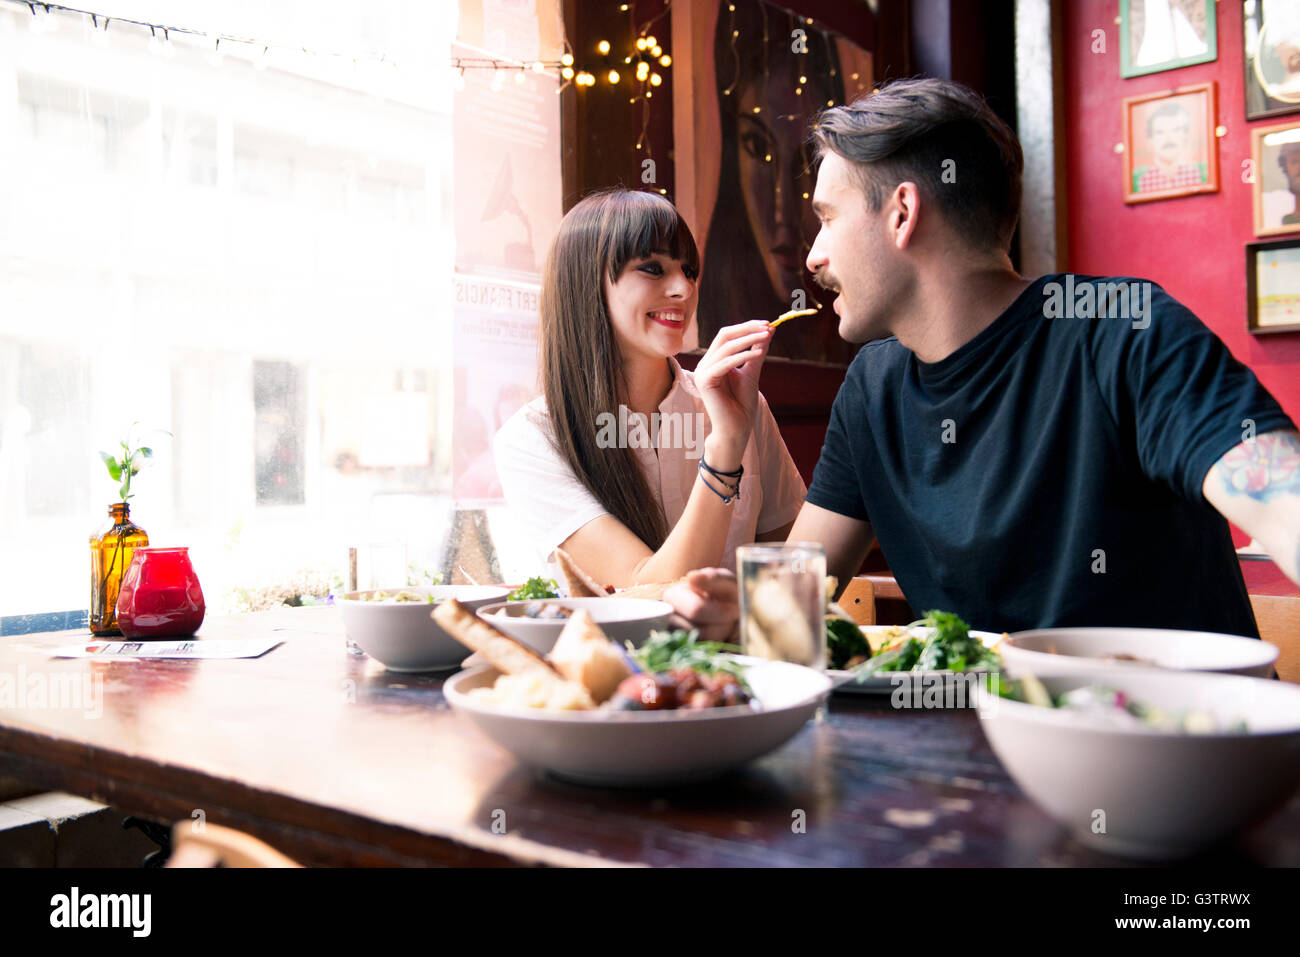 A young couple enjoying a meal together in a coffee shop in Manchester. Stock Photo